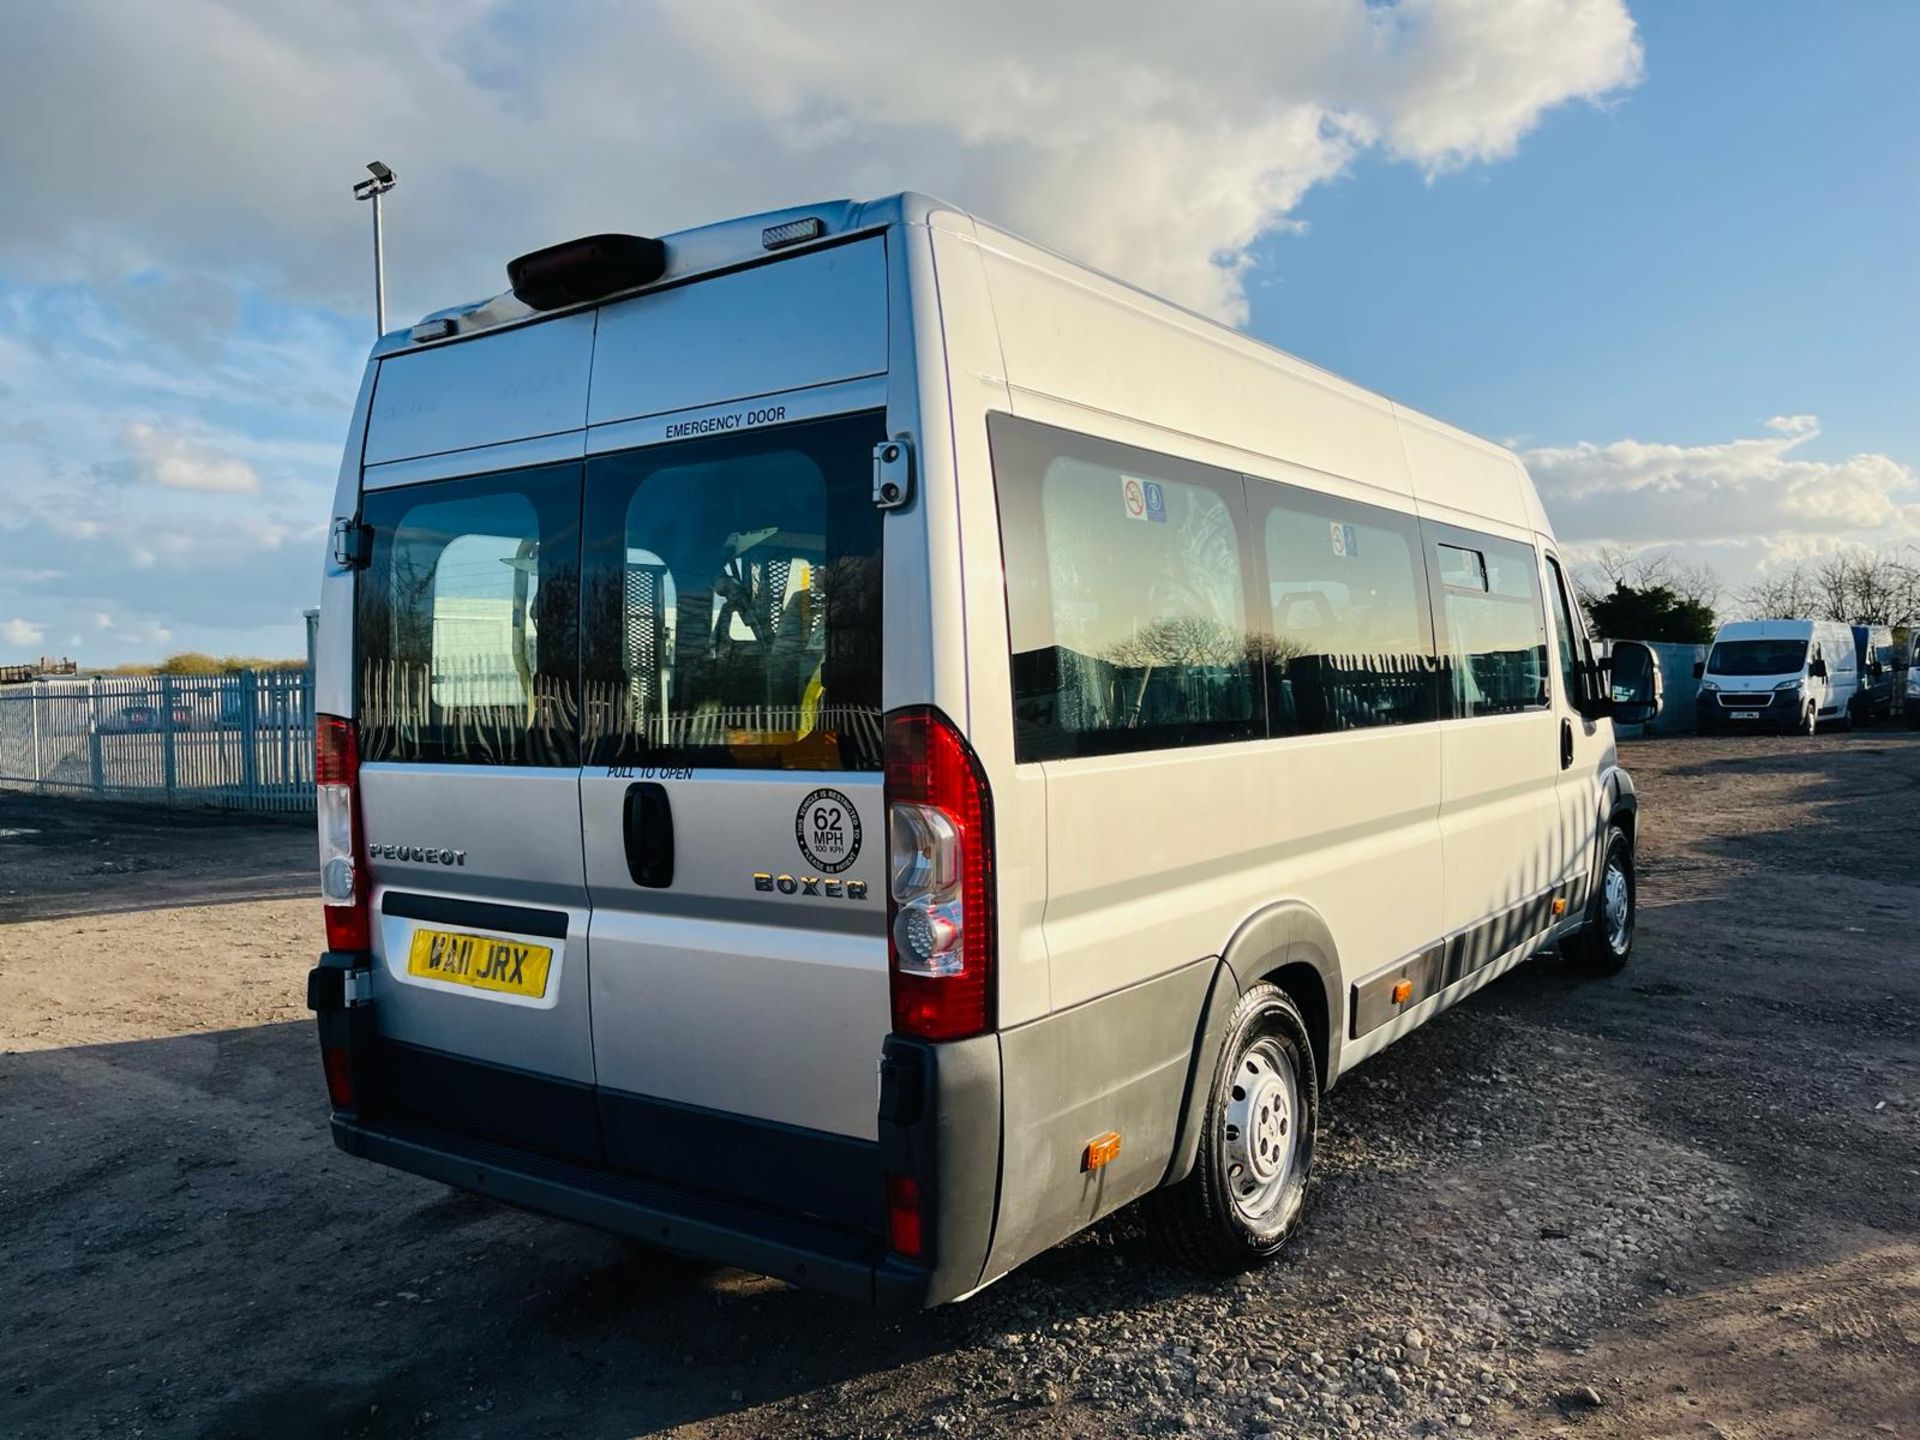 ** ON SALE ** Peugeot Boxer 435 2.0 HDI Minibus L4 H2 2011'11 Reg' -1 Former Keeper-Extra Long Wheel - Image 15 of 31